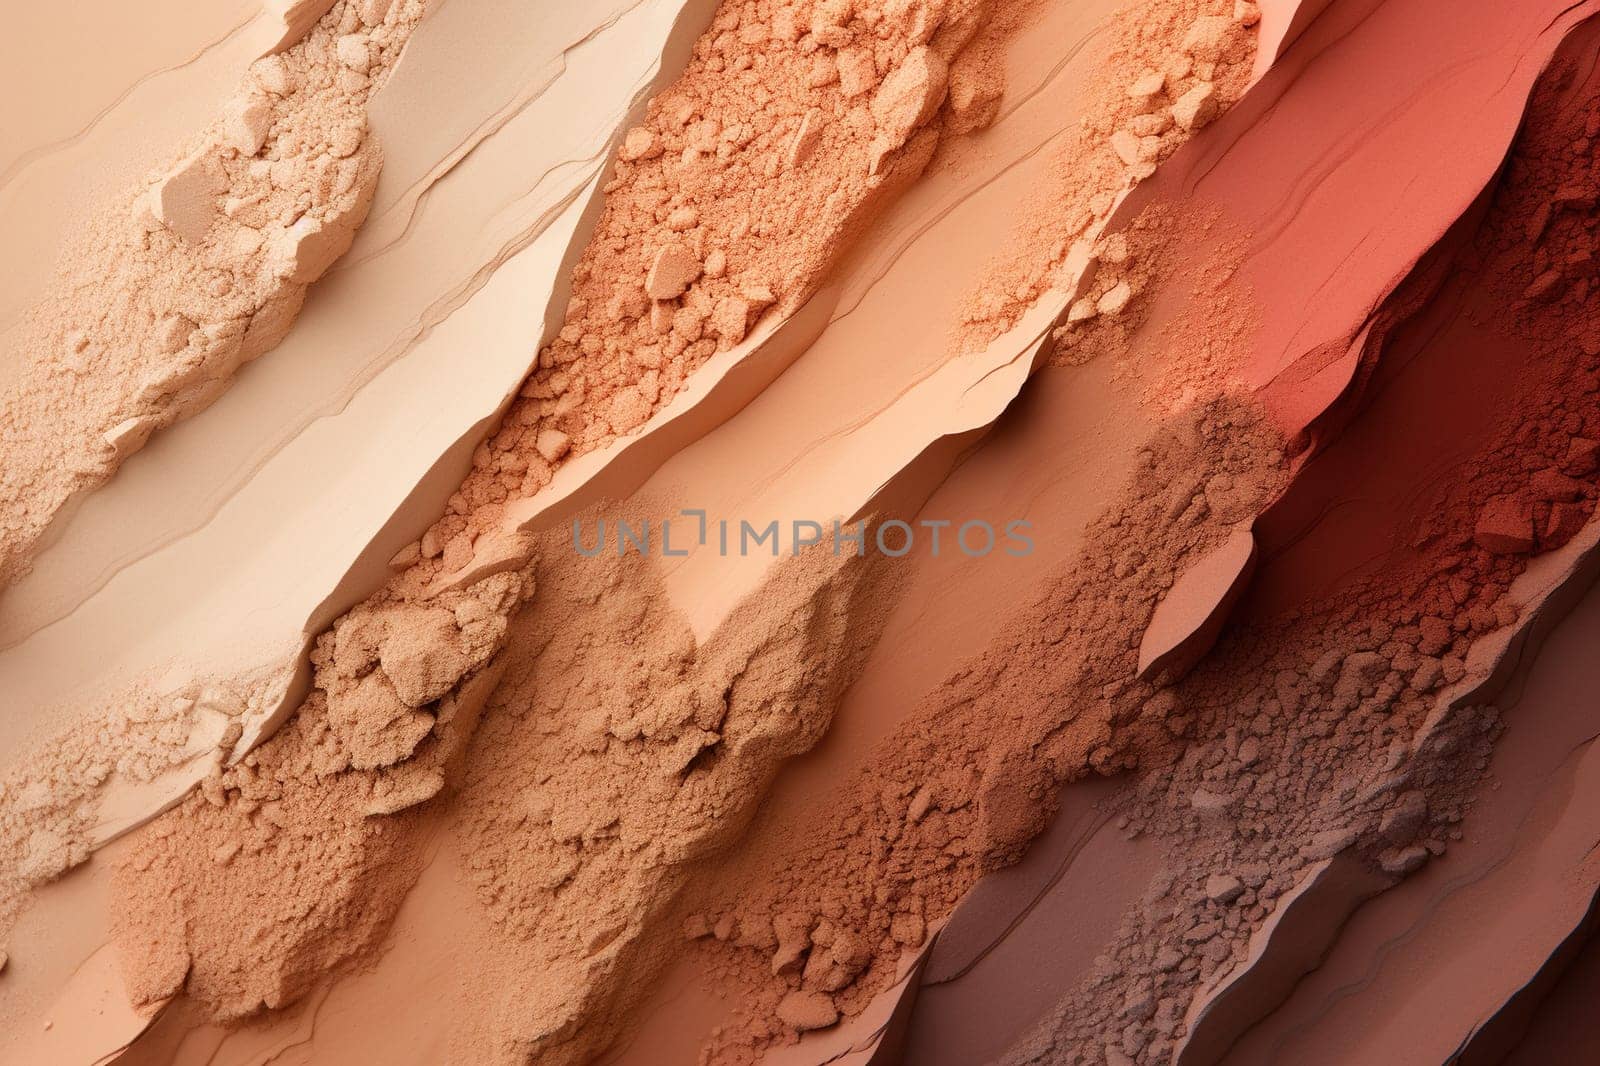 Eyeshadow texture in natural brown tones. Natural sand background.